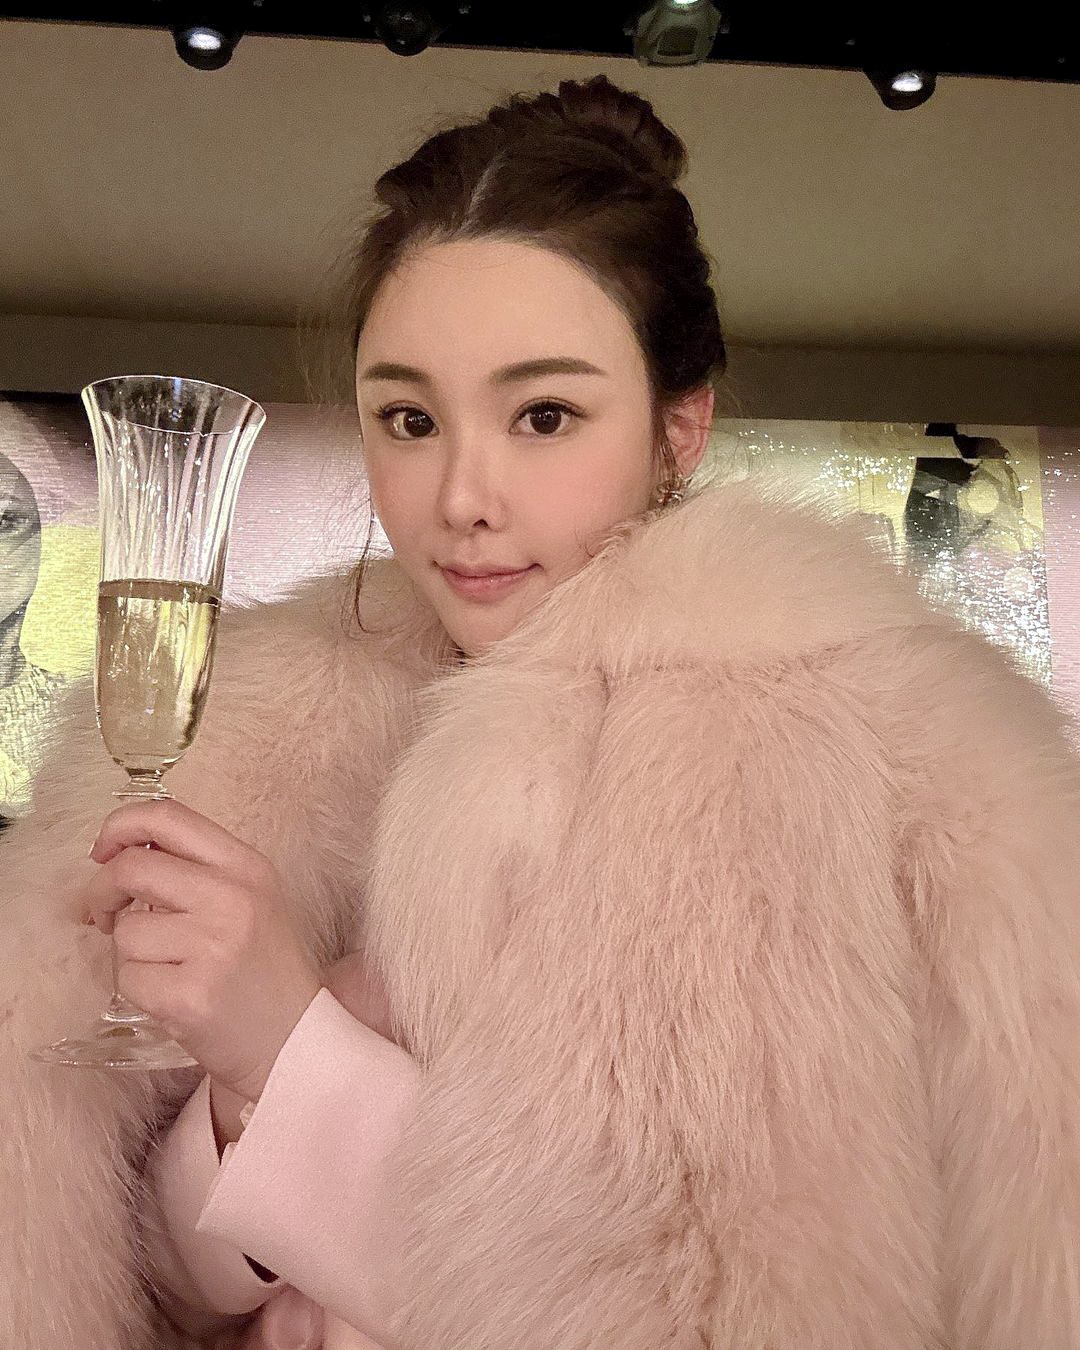 This Missing Hong Kong Influencer Model Has Been Found Murdered And People Want Answers